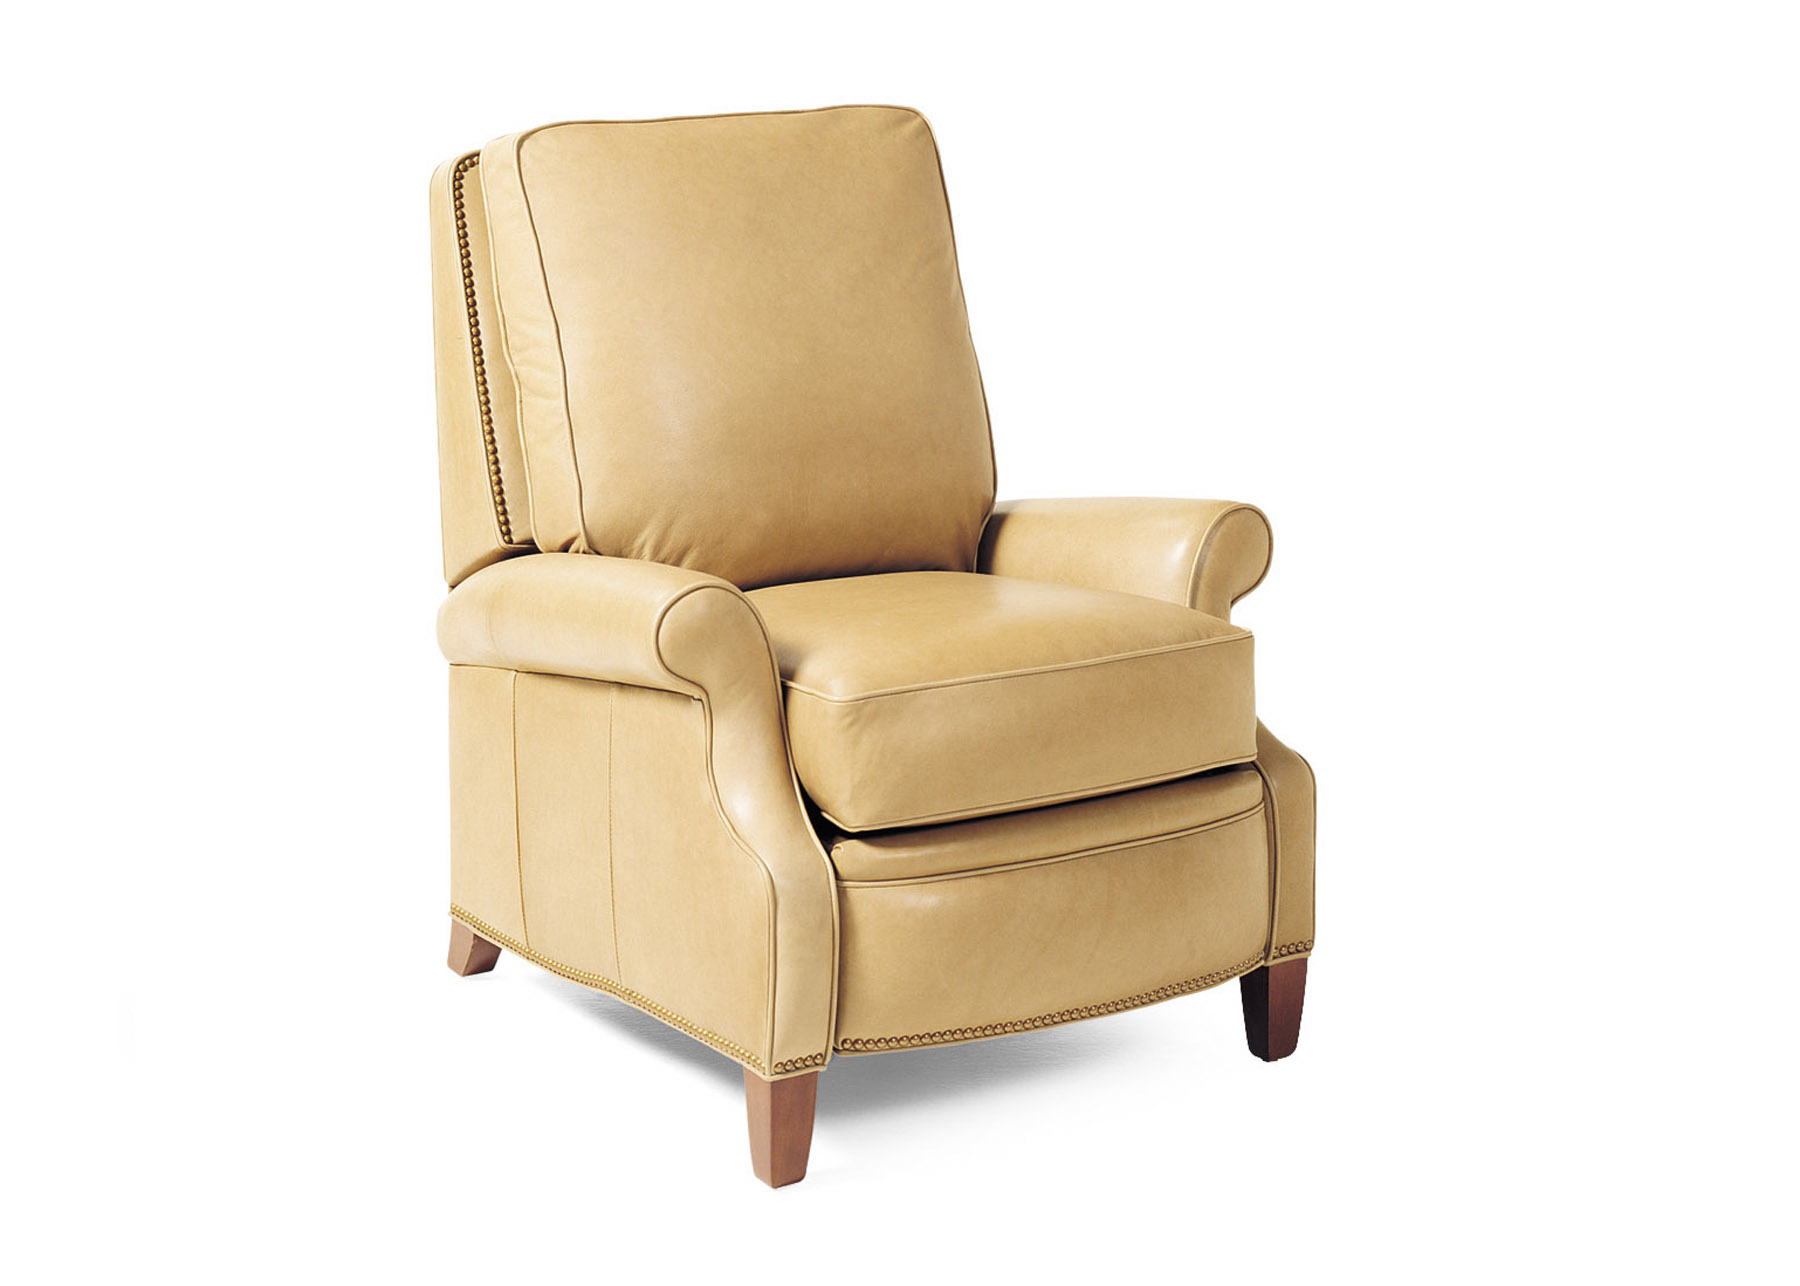 FOUNDERS RECLINER